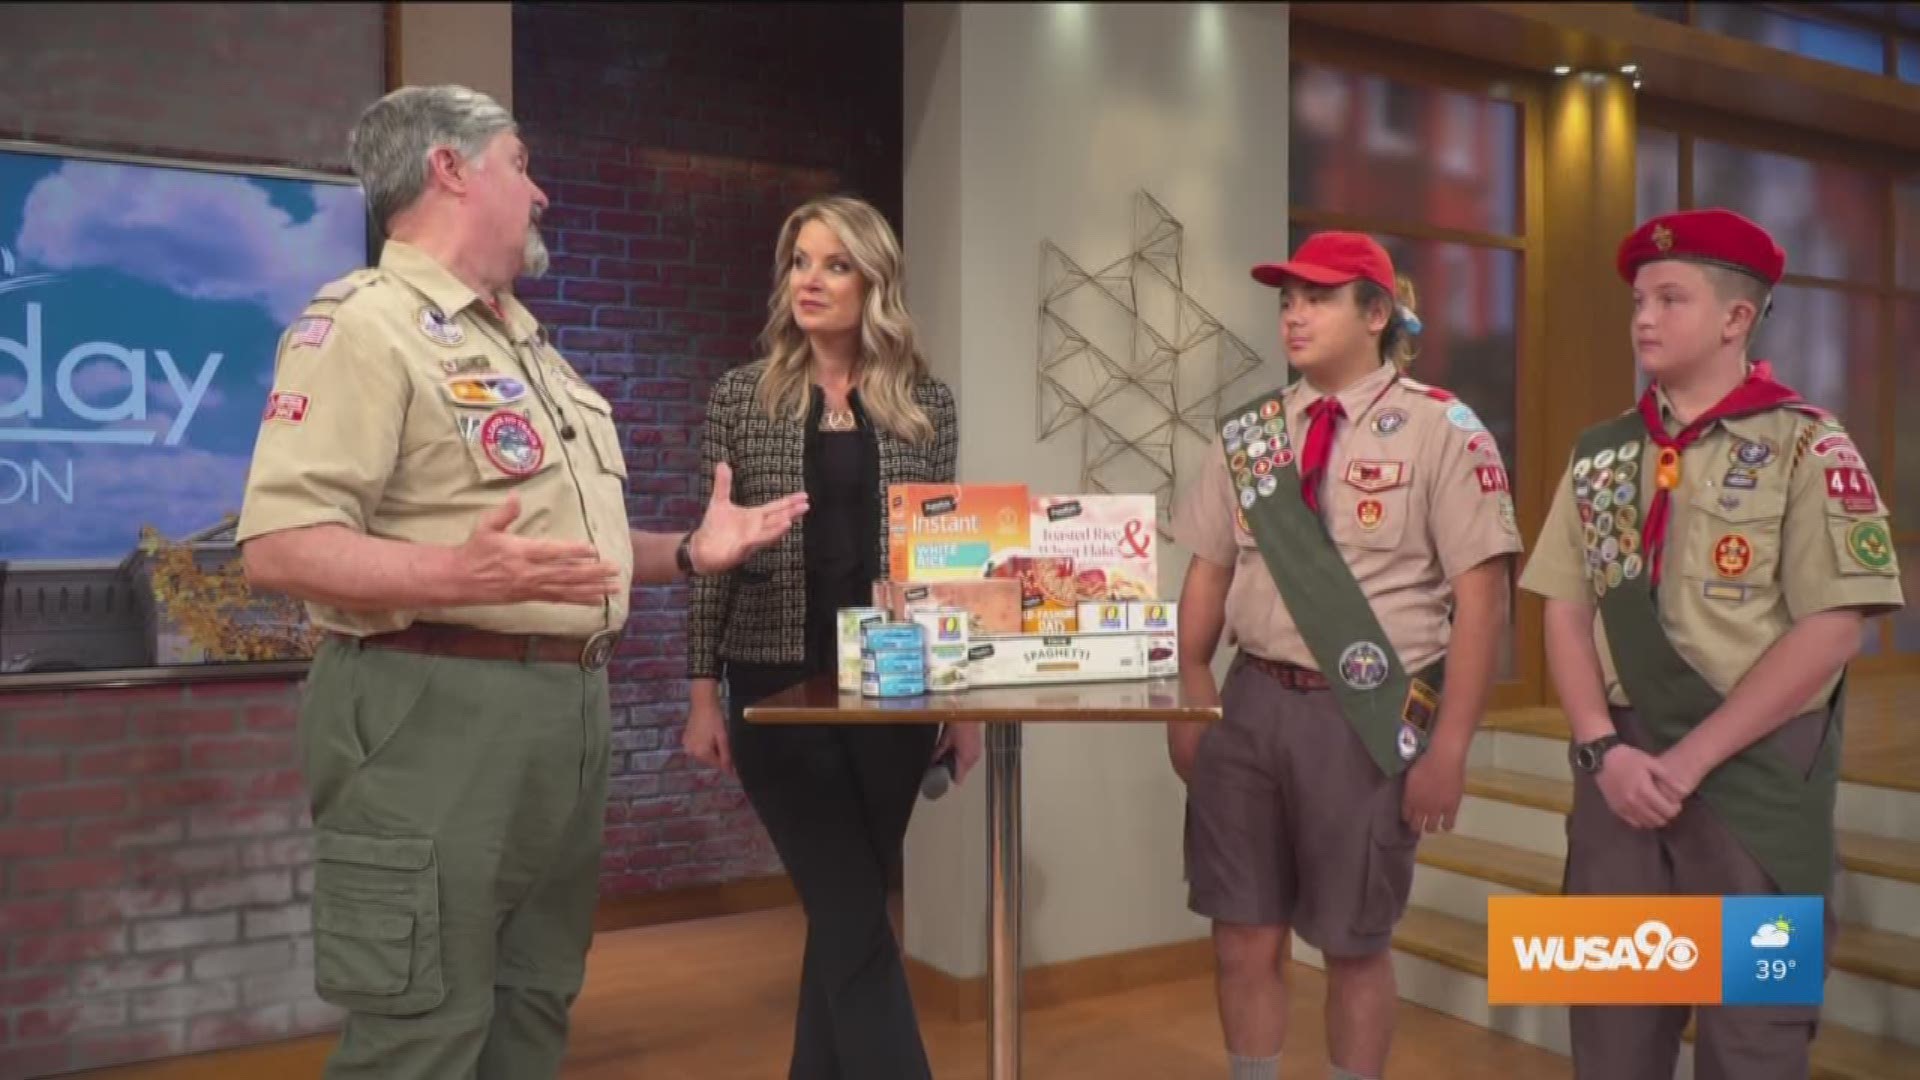 Robert Owen, Scouting for Food Chair is joined with two Boy Scouts who chat about their annual scouting for food initiative.